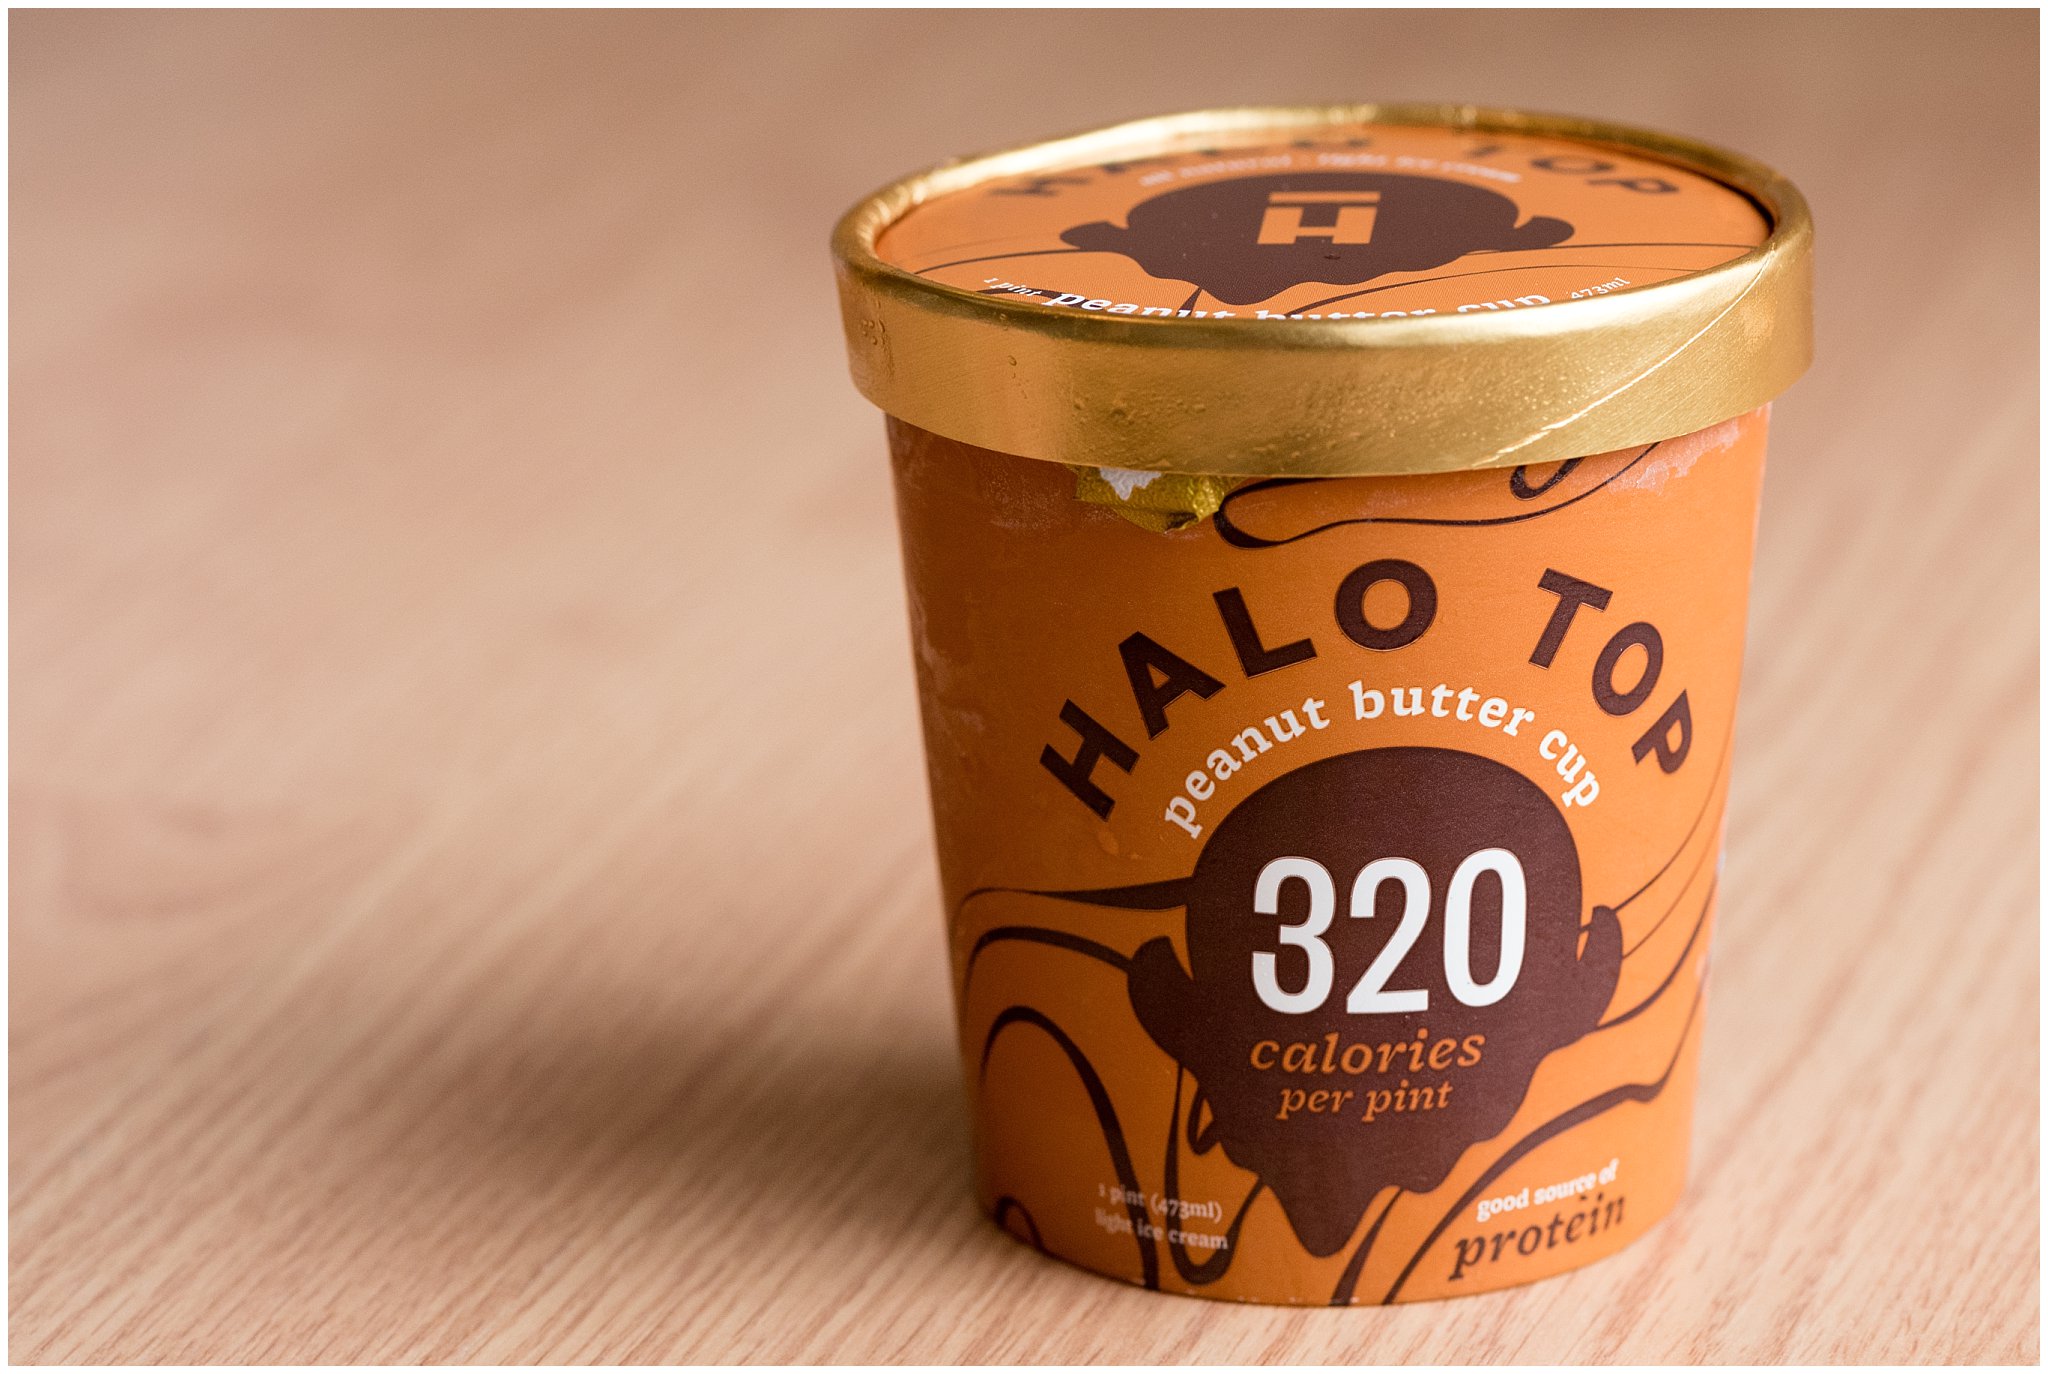 Peanut Butter Cup | Review of Halo Top Ice Cream Flavors